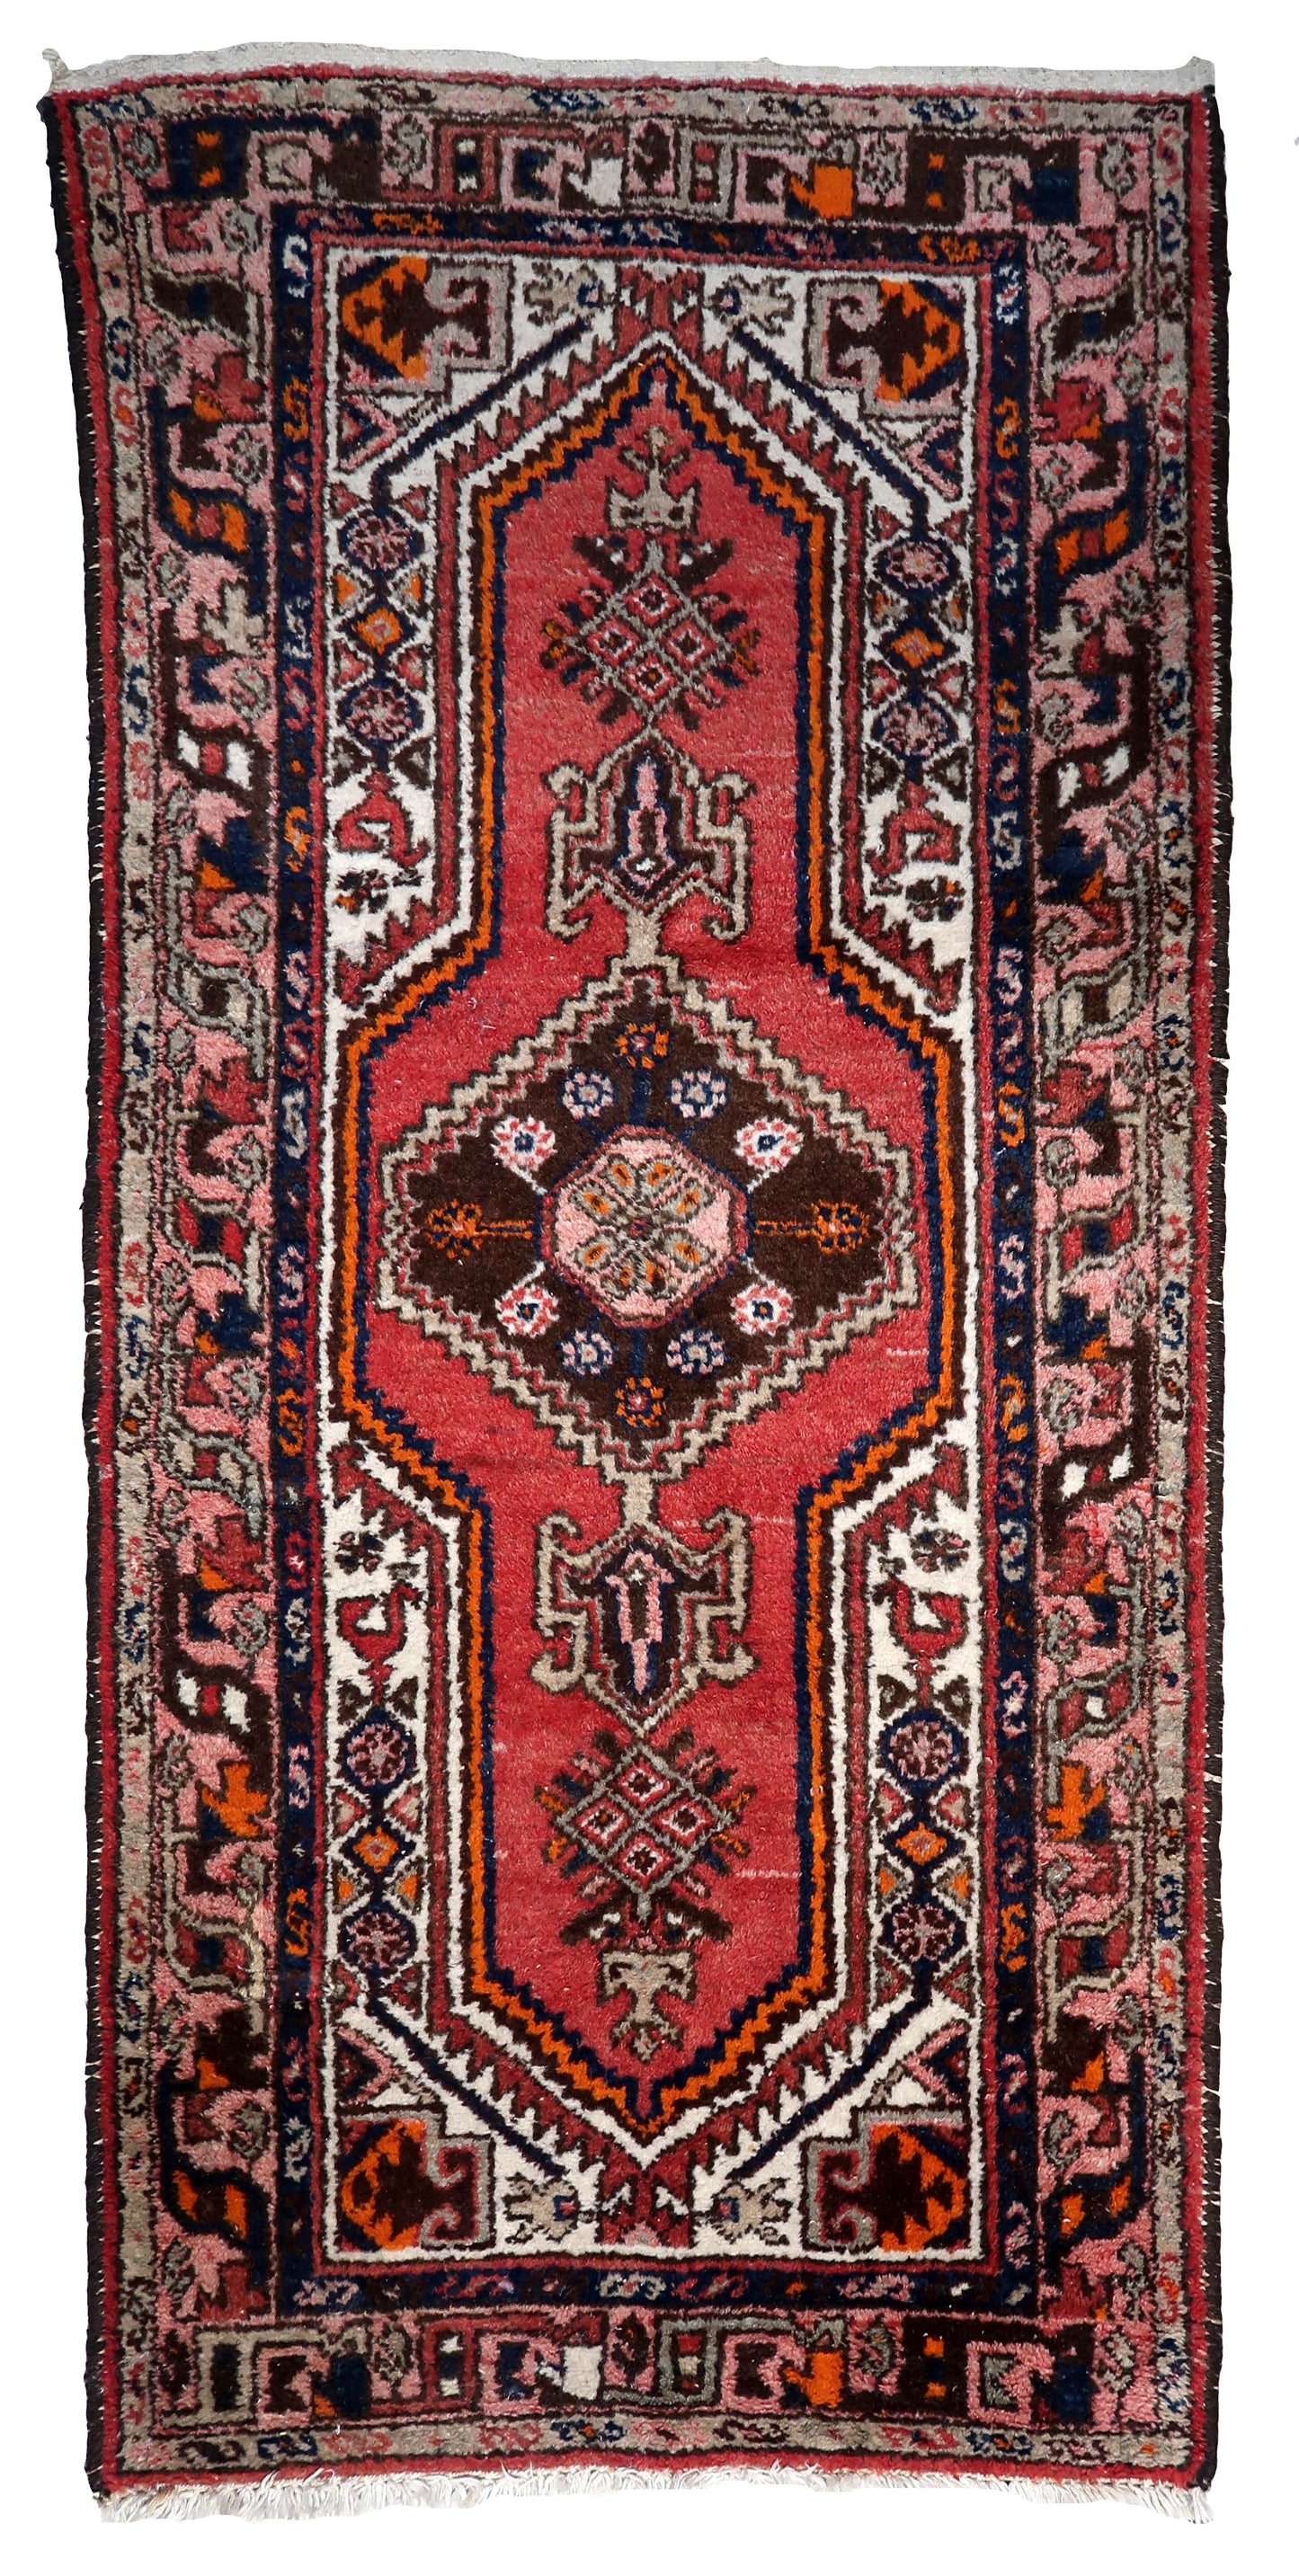 Handmade vintage Persian Hamadan rug with traditional design and vibrant colors